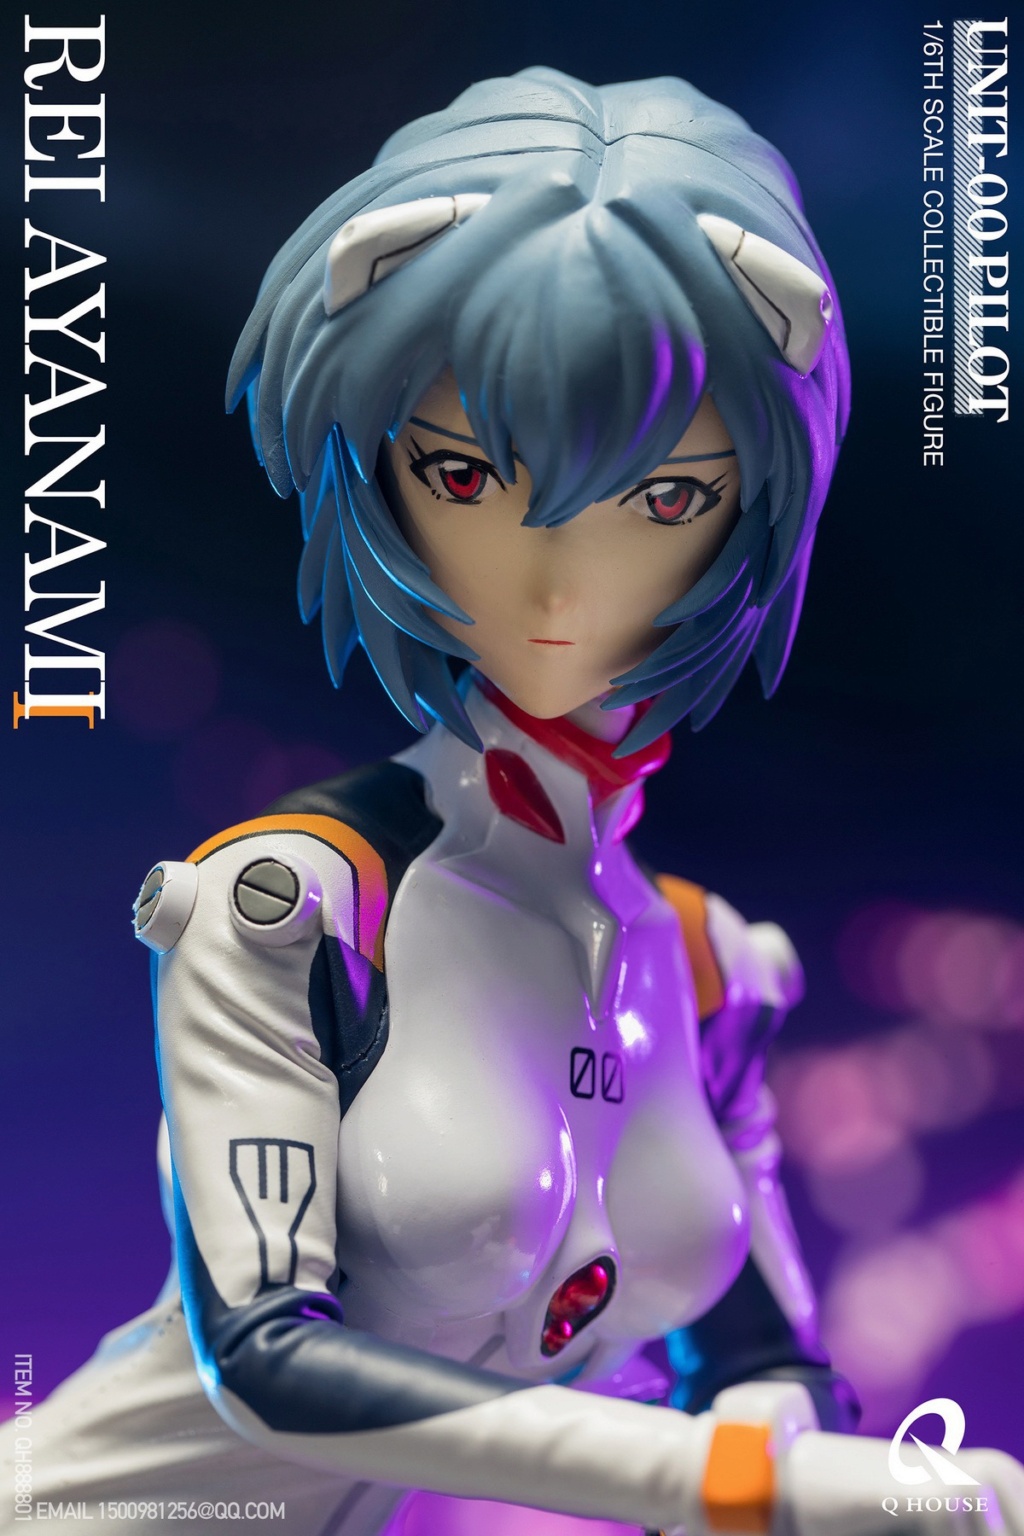 Anime - NEW PRODUCT: Q House: 1/6 Evangelion - Rei Ayanami  11142310